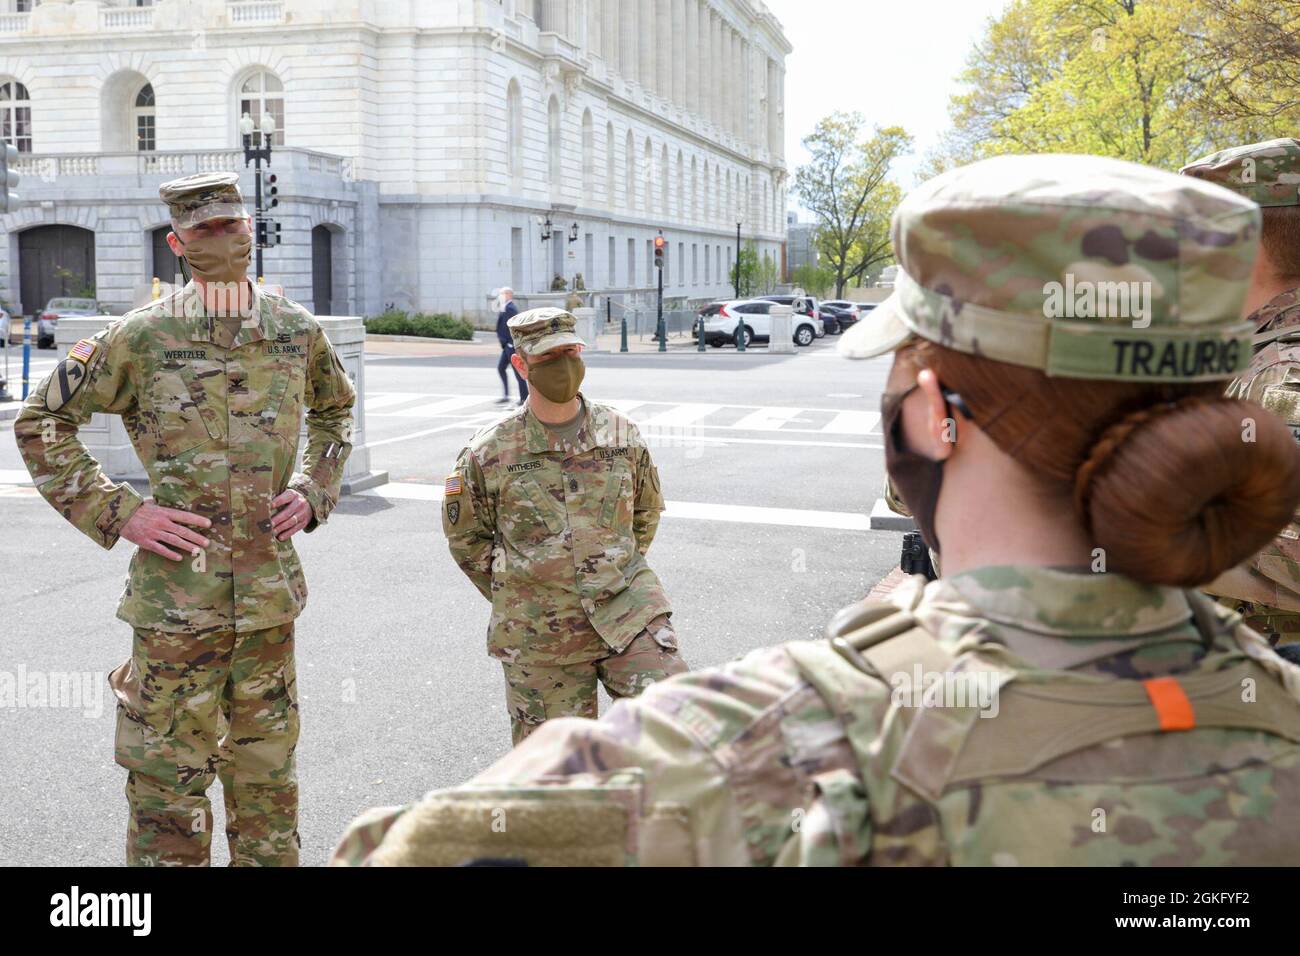 U.S. Army Col. Brian Wertzler, left, deputy adjutant general, Kentucky National Guard, and Command Sgt. Maj. Jesse Withers, center, state command sergeant major, Kentucky National Guard, addresses a group of Soldiers near the U.S. Capitol in Washington, D.C., April 12, 2021. The National Guard has been requested to continue supporting federal law enforcement agencies with security, communications, medical evacuation, logistics, and safety support to state, district and federal agencies through mid-May. Stock Photo